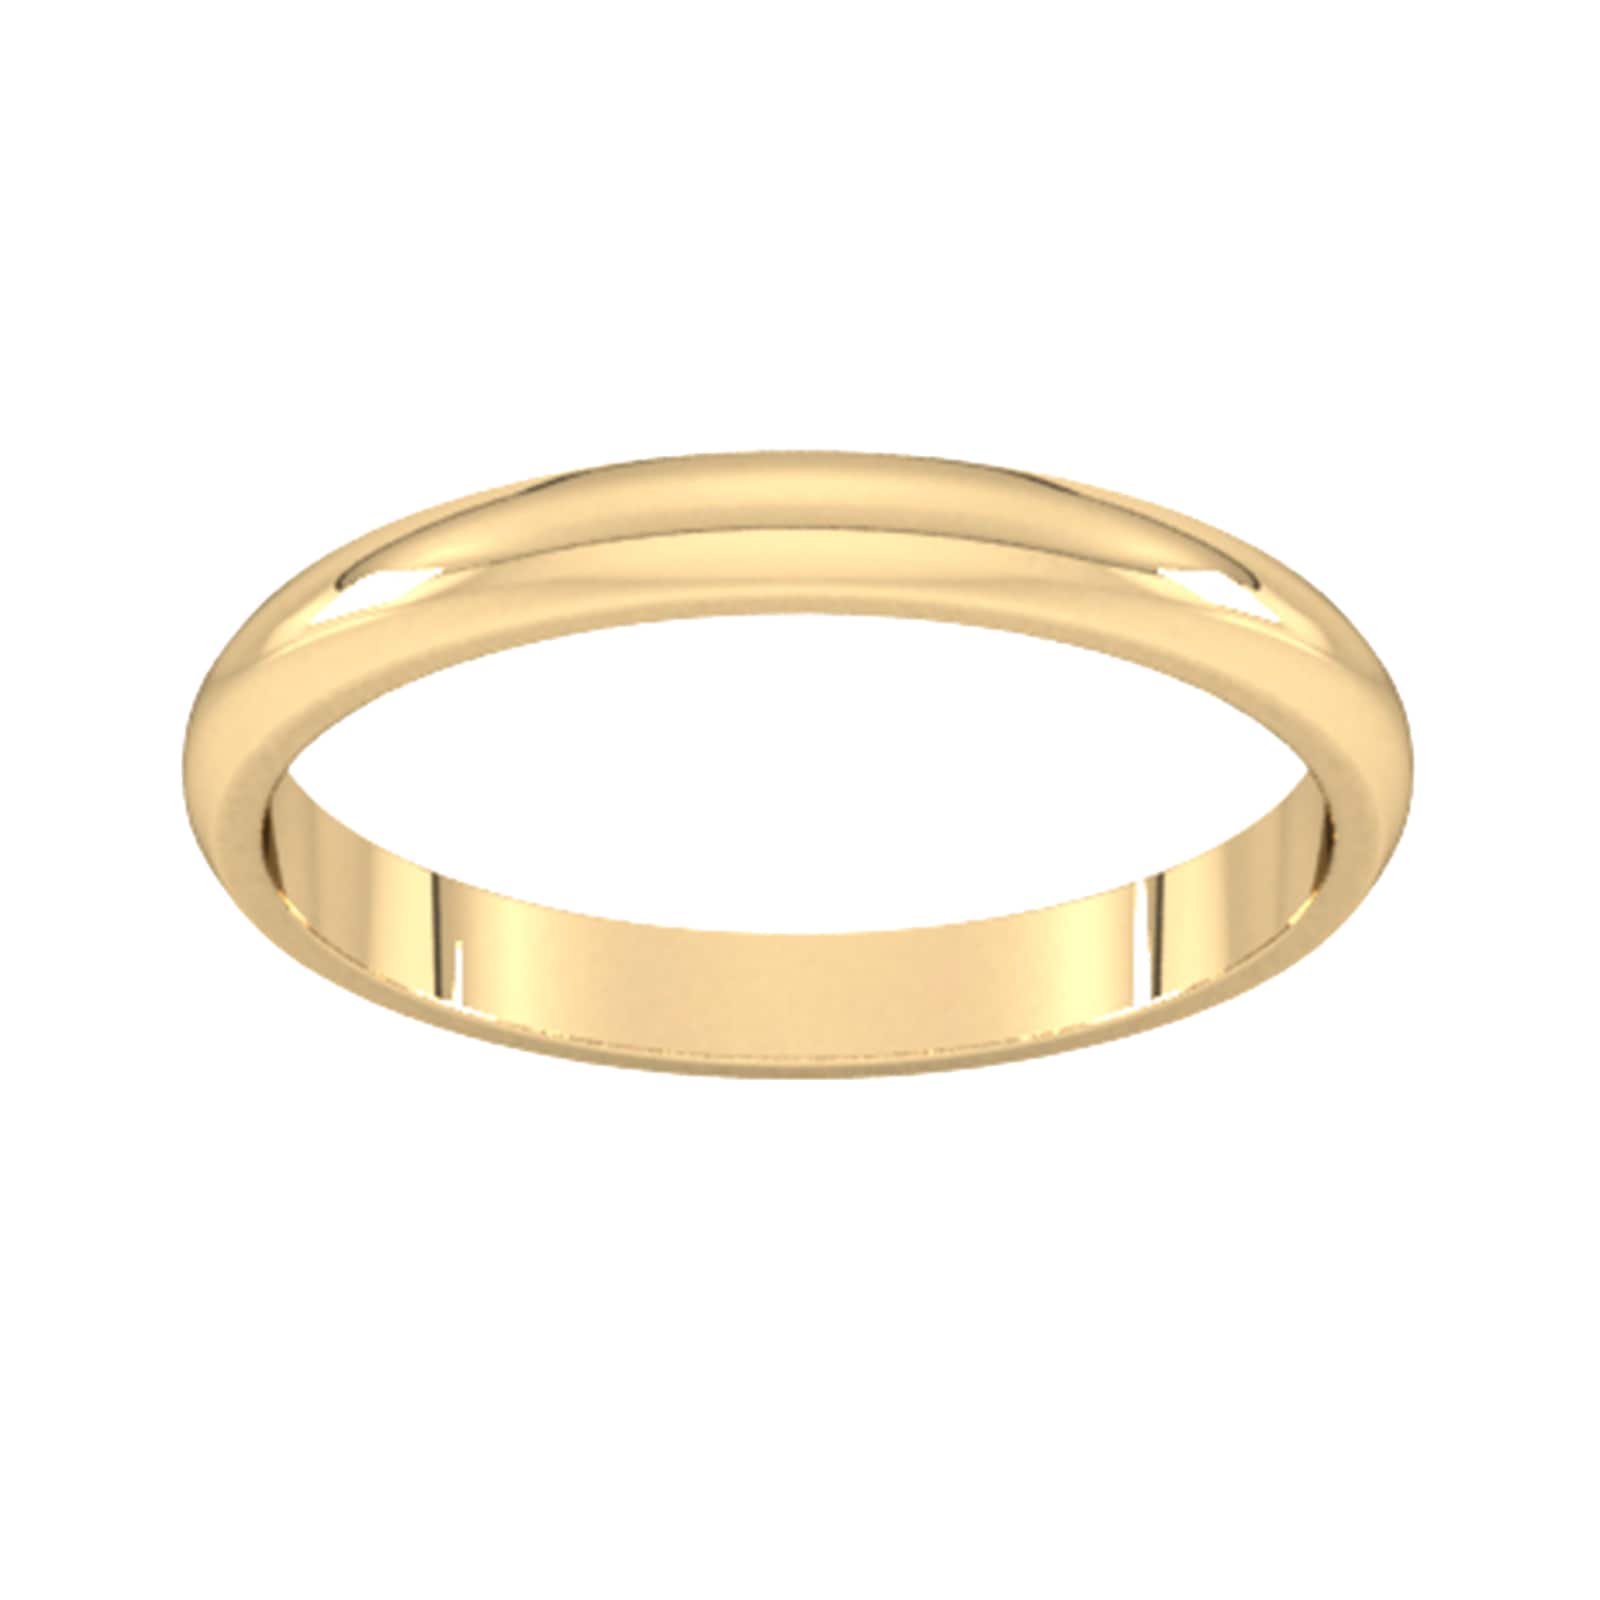 2.5mm D Shape Standard Wedding Ring In 9 Carat Yellow Gold - Ring Size M